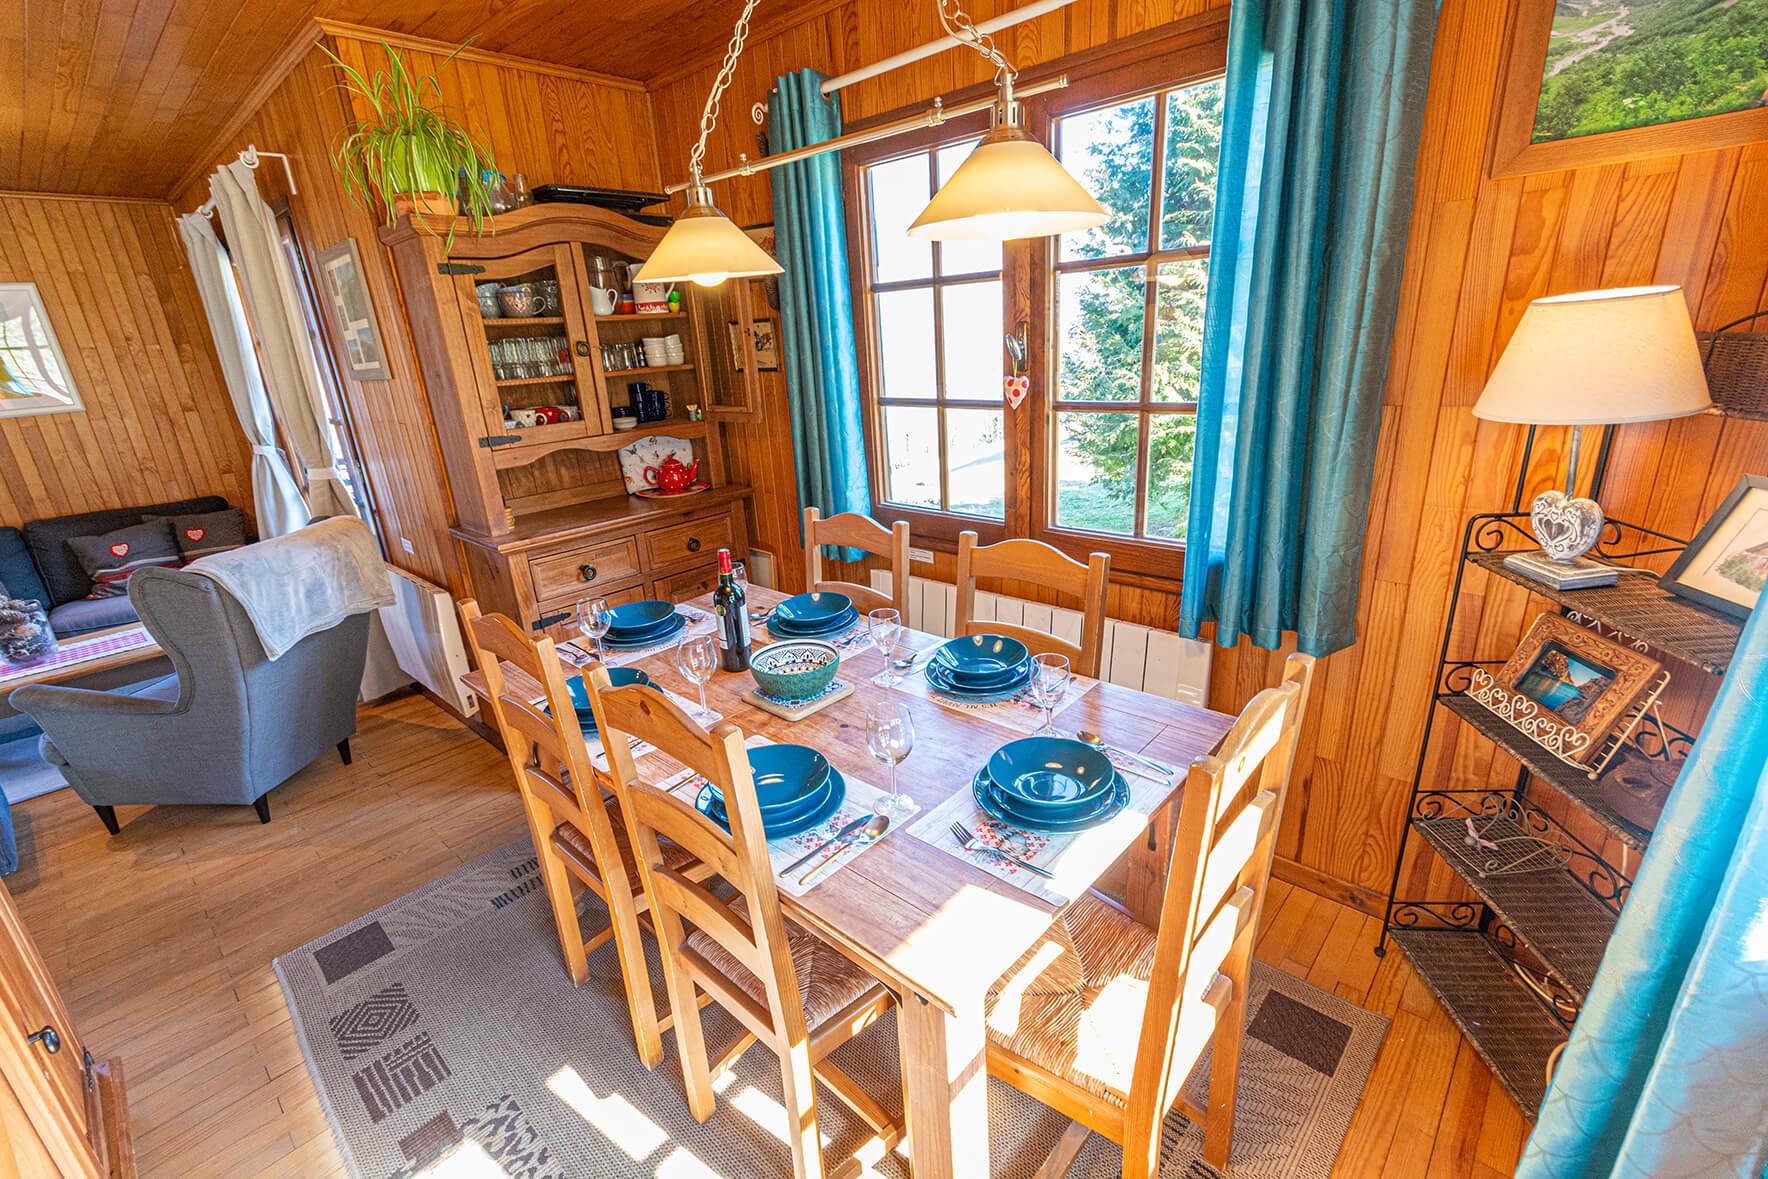 Chalet Le Gerbera La Rivière Enverse - The dining area can comfortably seat up to 6 people